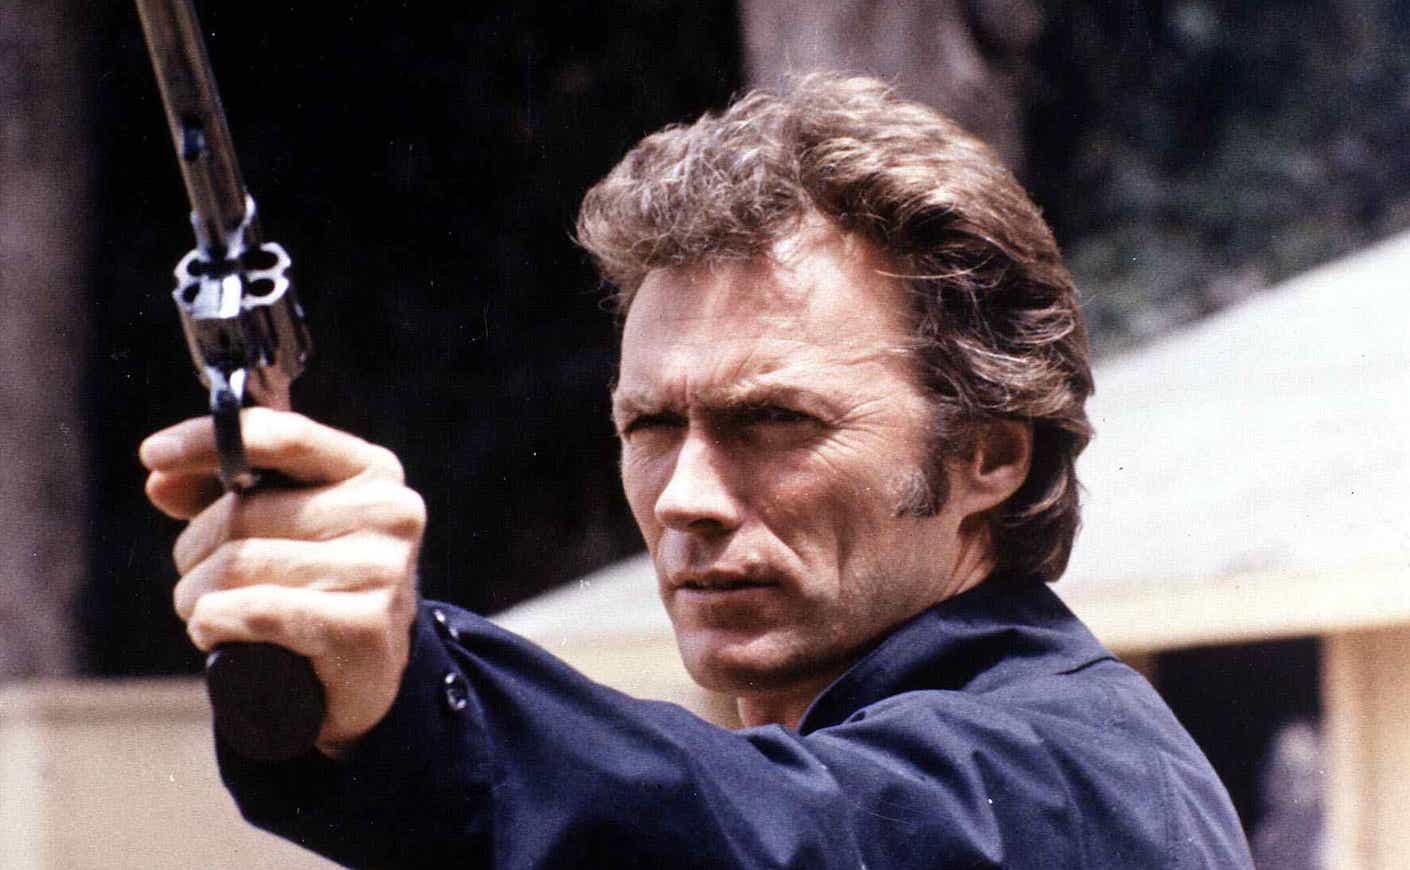 clint eastwood holding a gun in Dirty Harry